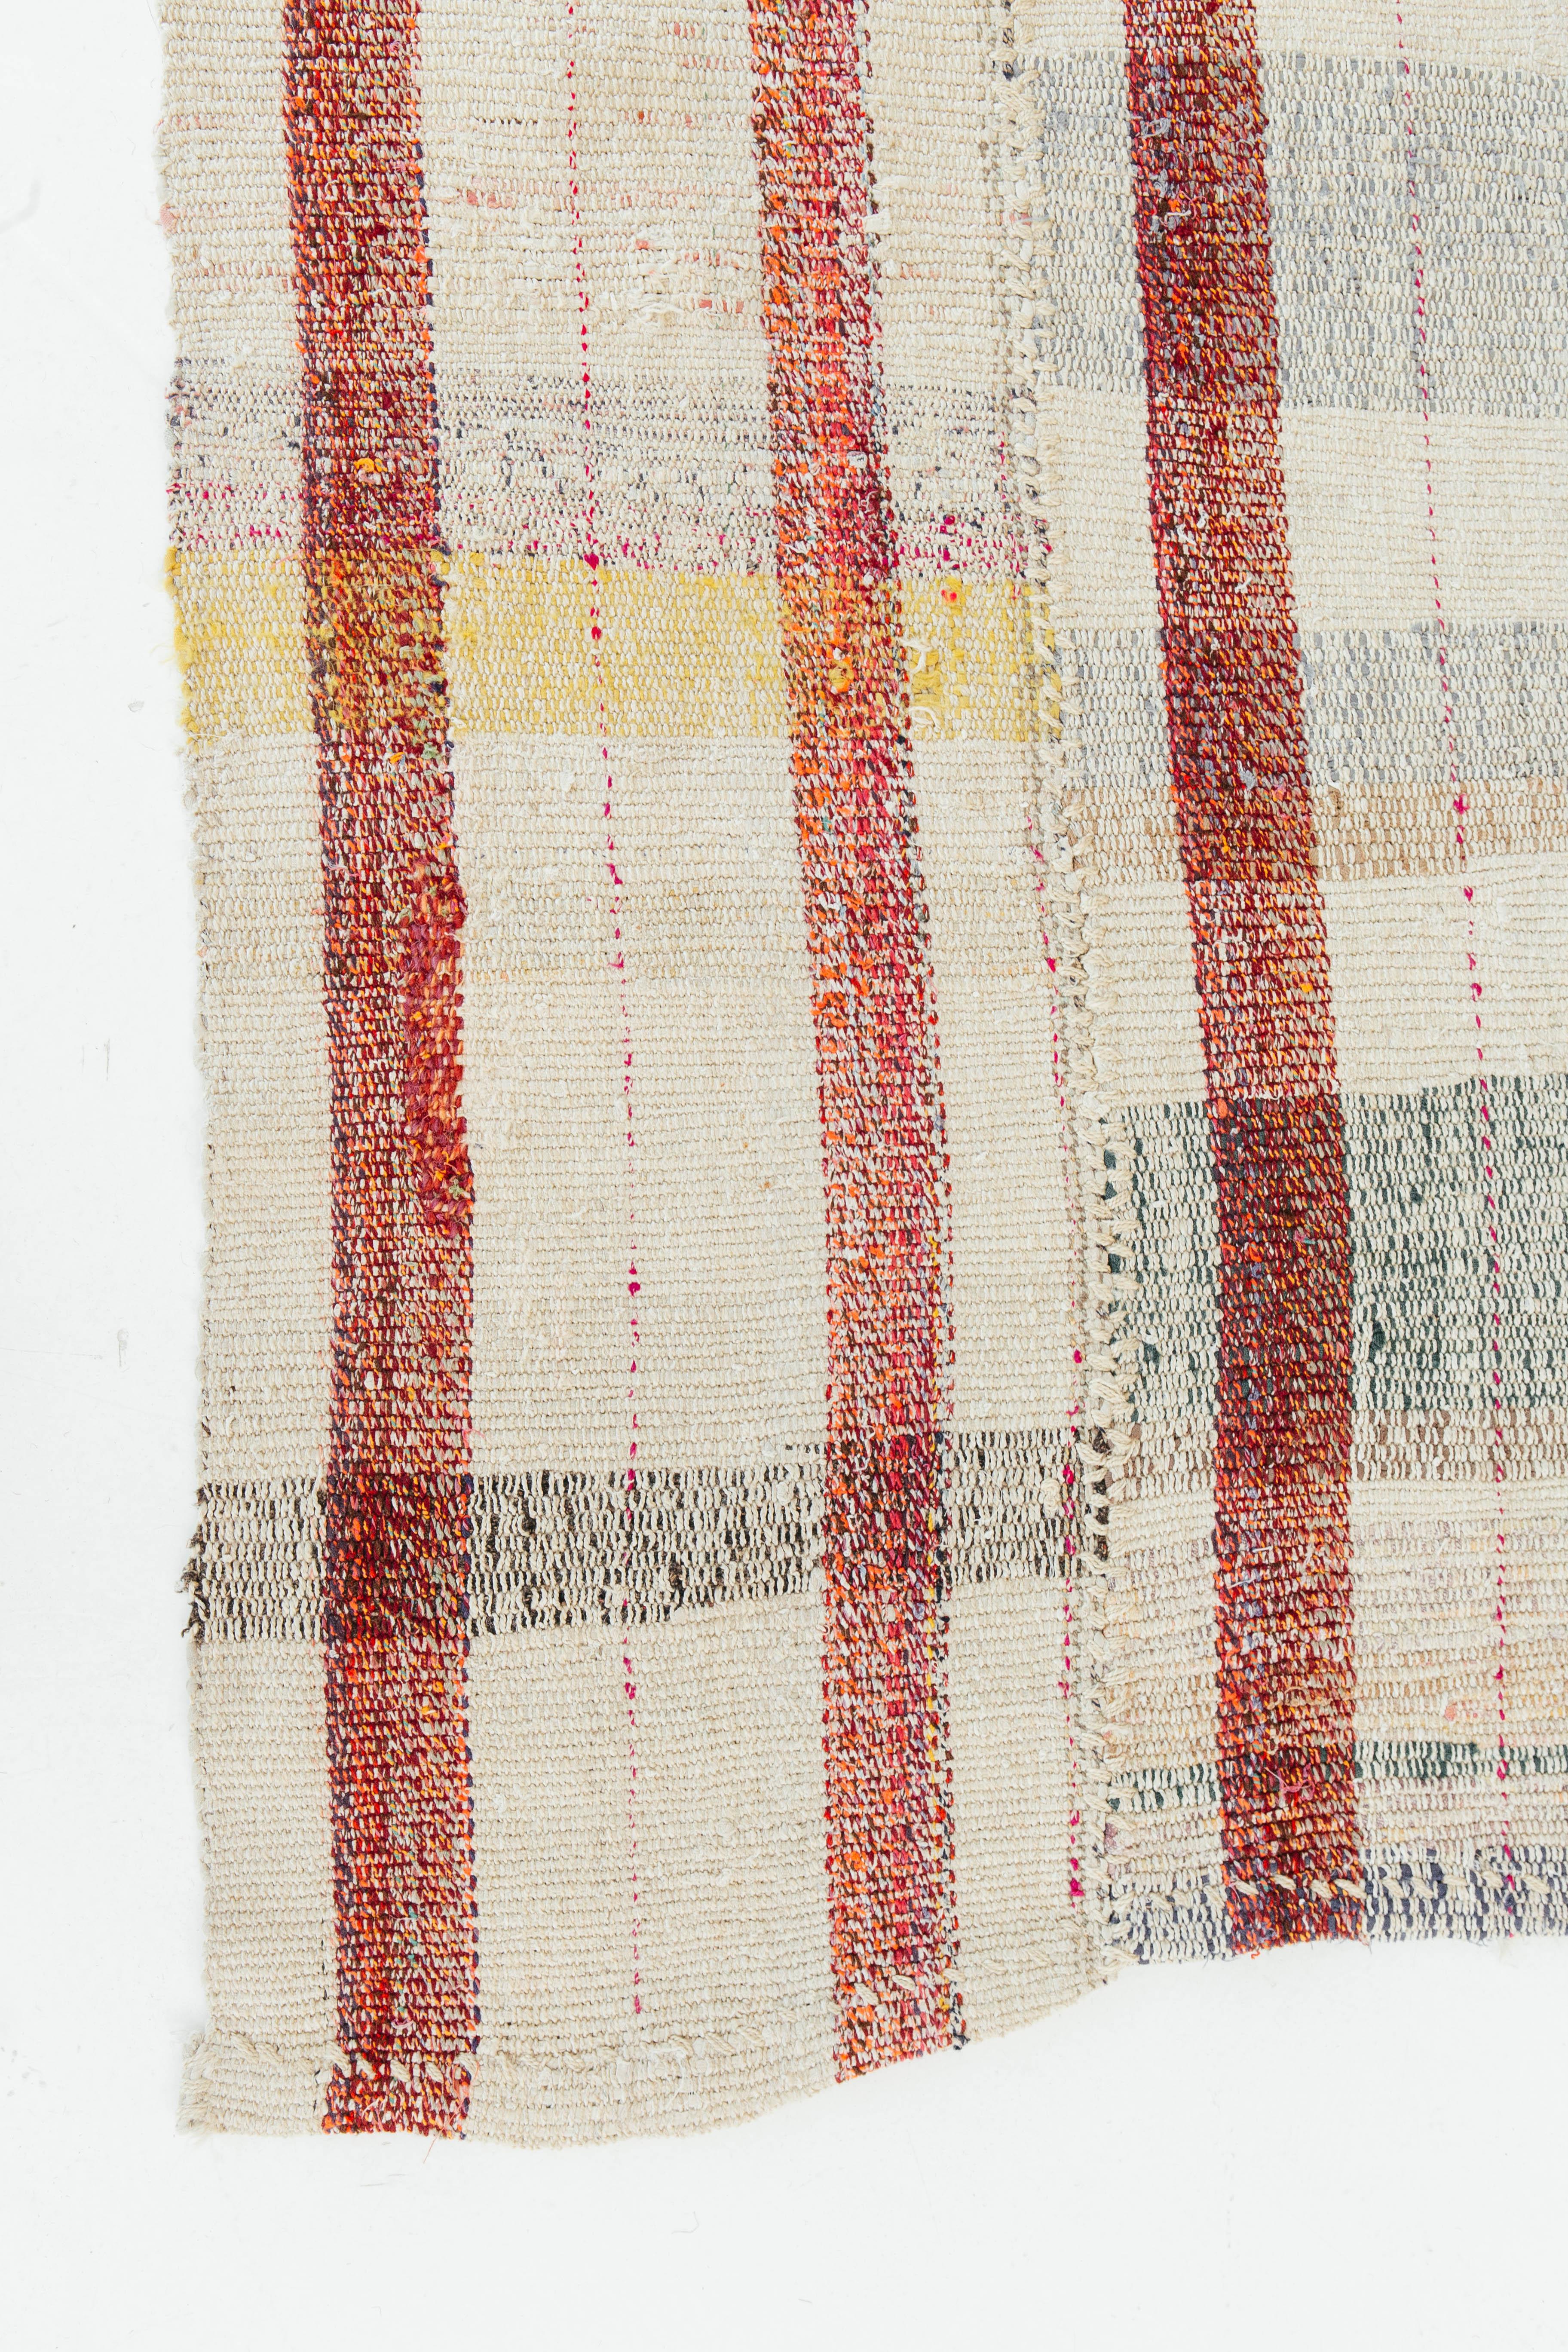 A unique vintage Anatolian Turkish rug that weaves together beautiful colors to create an irregular plaid pattern. Red vertical stripes bring a bold and playful essence meanwhile sporadic colors of yellow, green, and blue peak through. Vintage